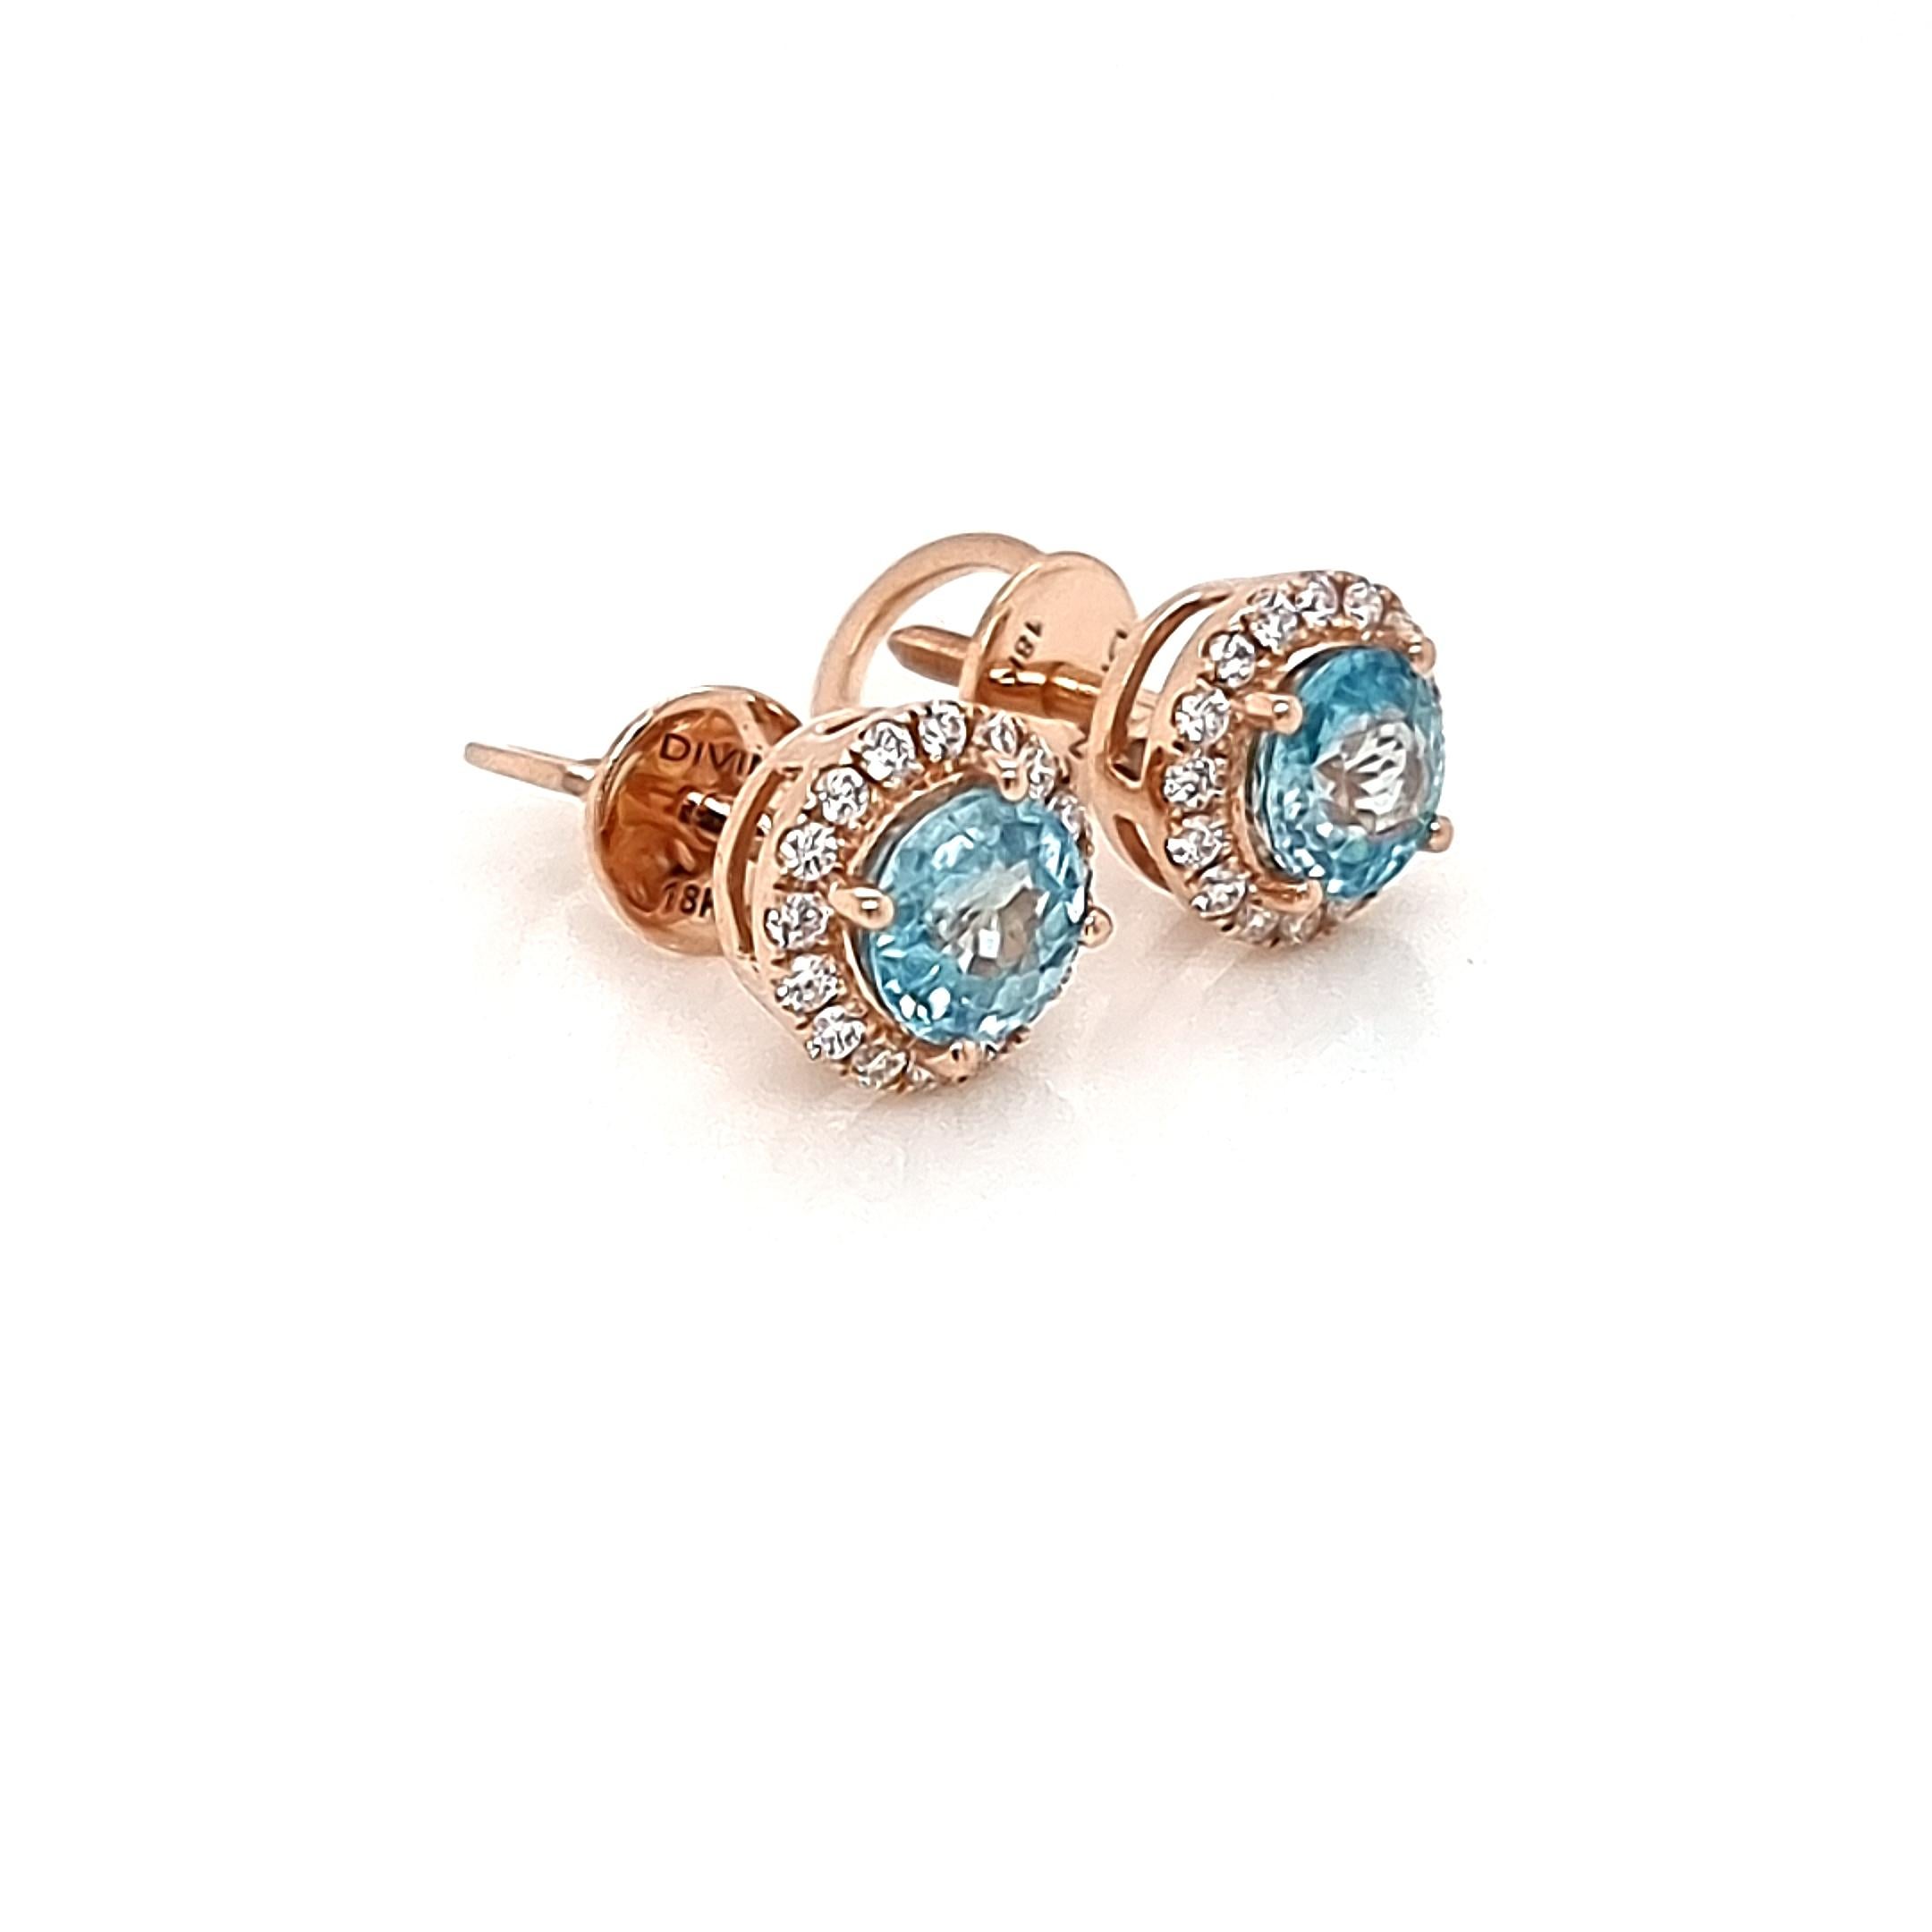 Introducing our exquisite earrings crafted with a captivating blend of 18K pink gold, gleaming white diamonds encircling the halo, and a mesmerizing blue natural 70 points zircon. These earrings boast a stunning and luxurious design, perfect for